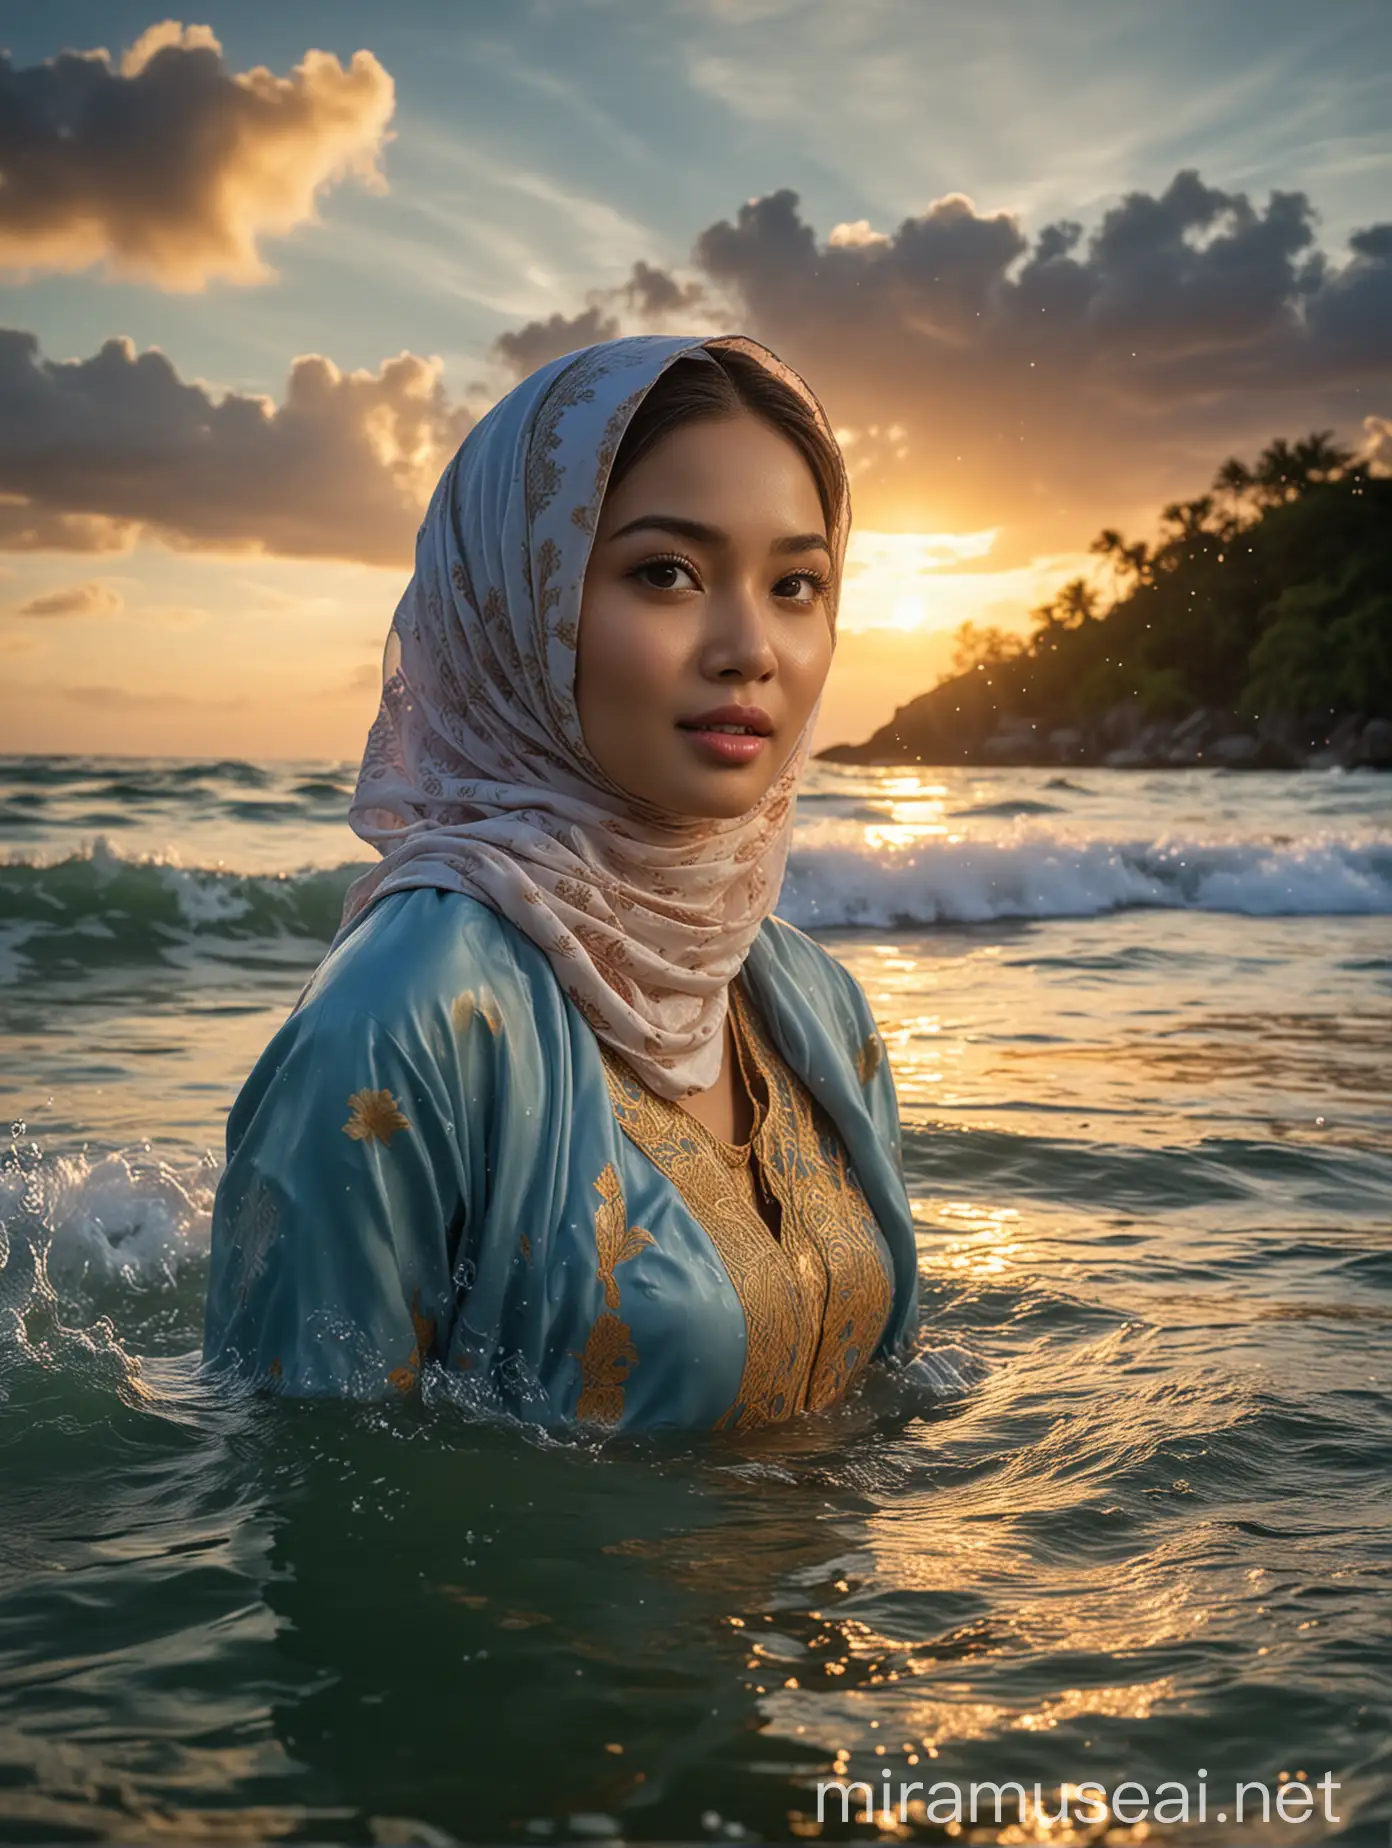 Underwater Portrait Photography Malaysian Girl in Hijab amidst Dramatic Waves